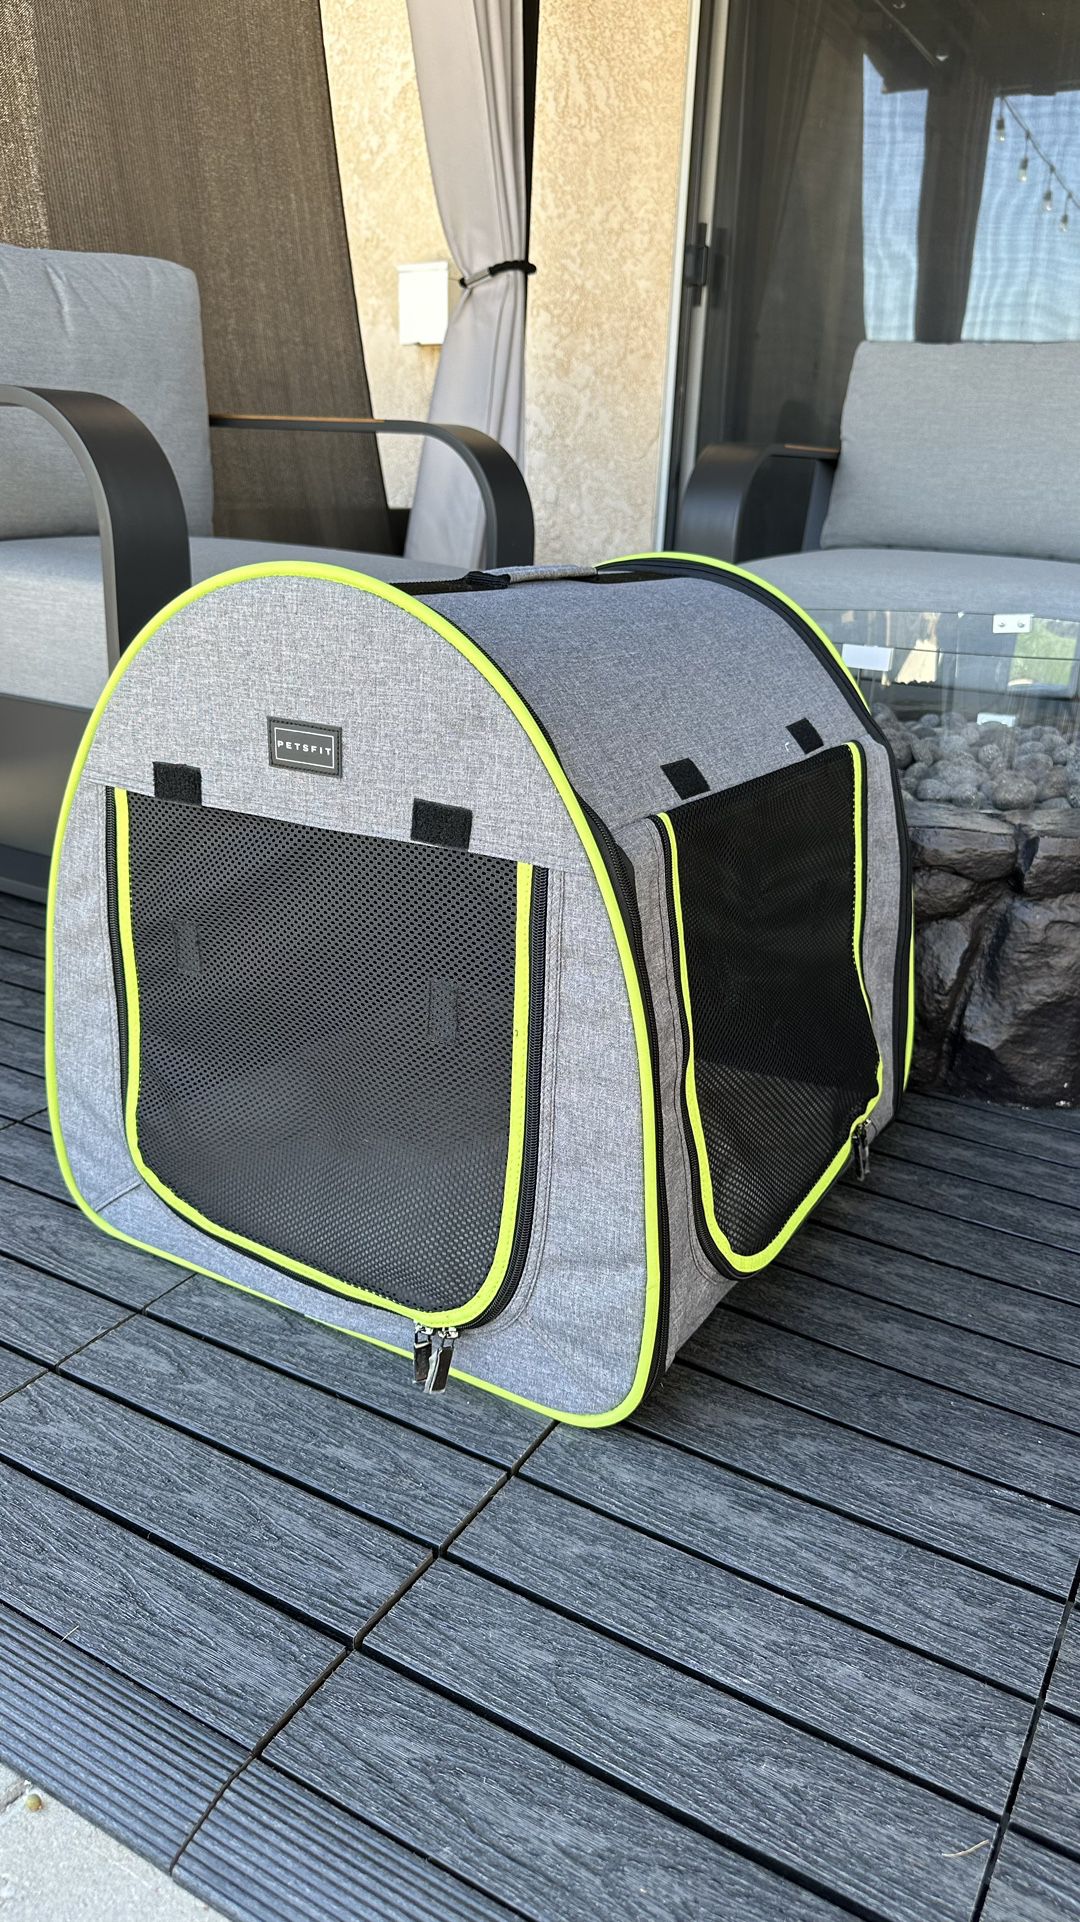 Foldable Dog Crate - For Small Dogs 